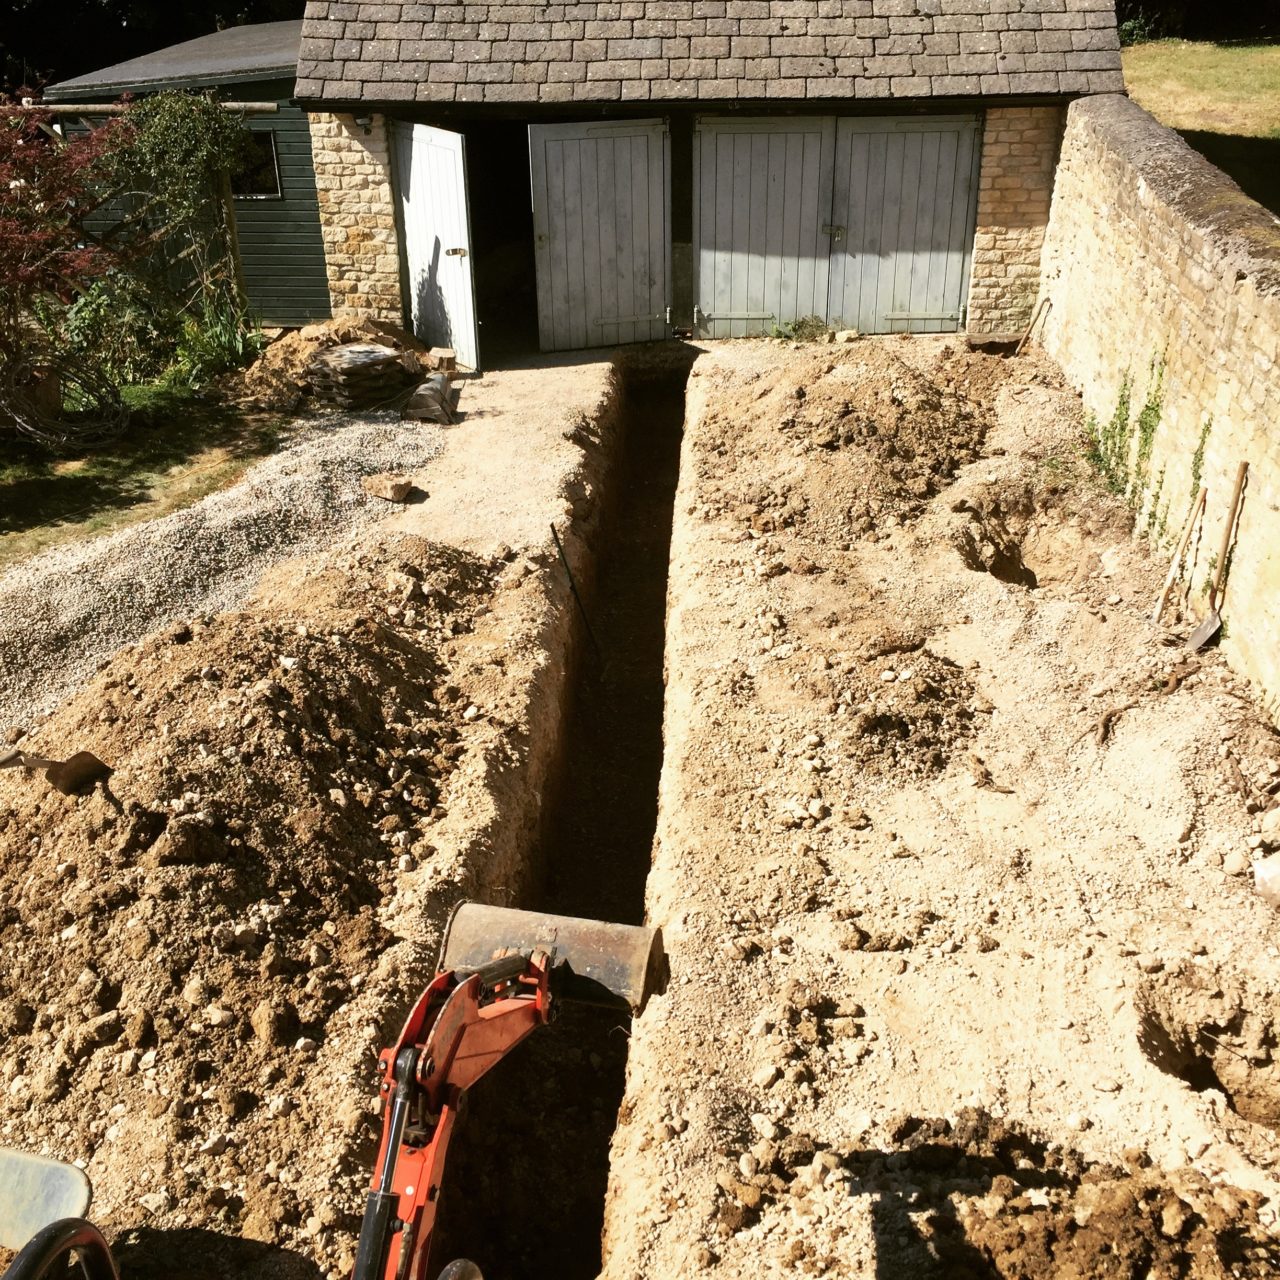 This trench marks the foundation line for the extension leading from our barn along this Cotswold wall & to what will become my new studio